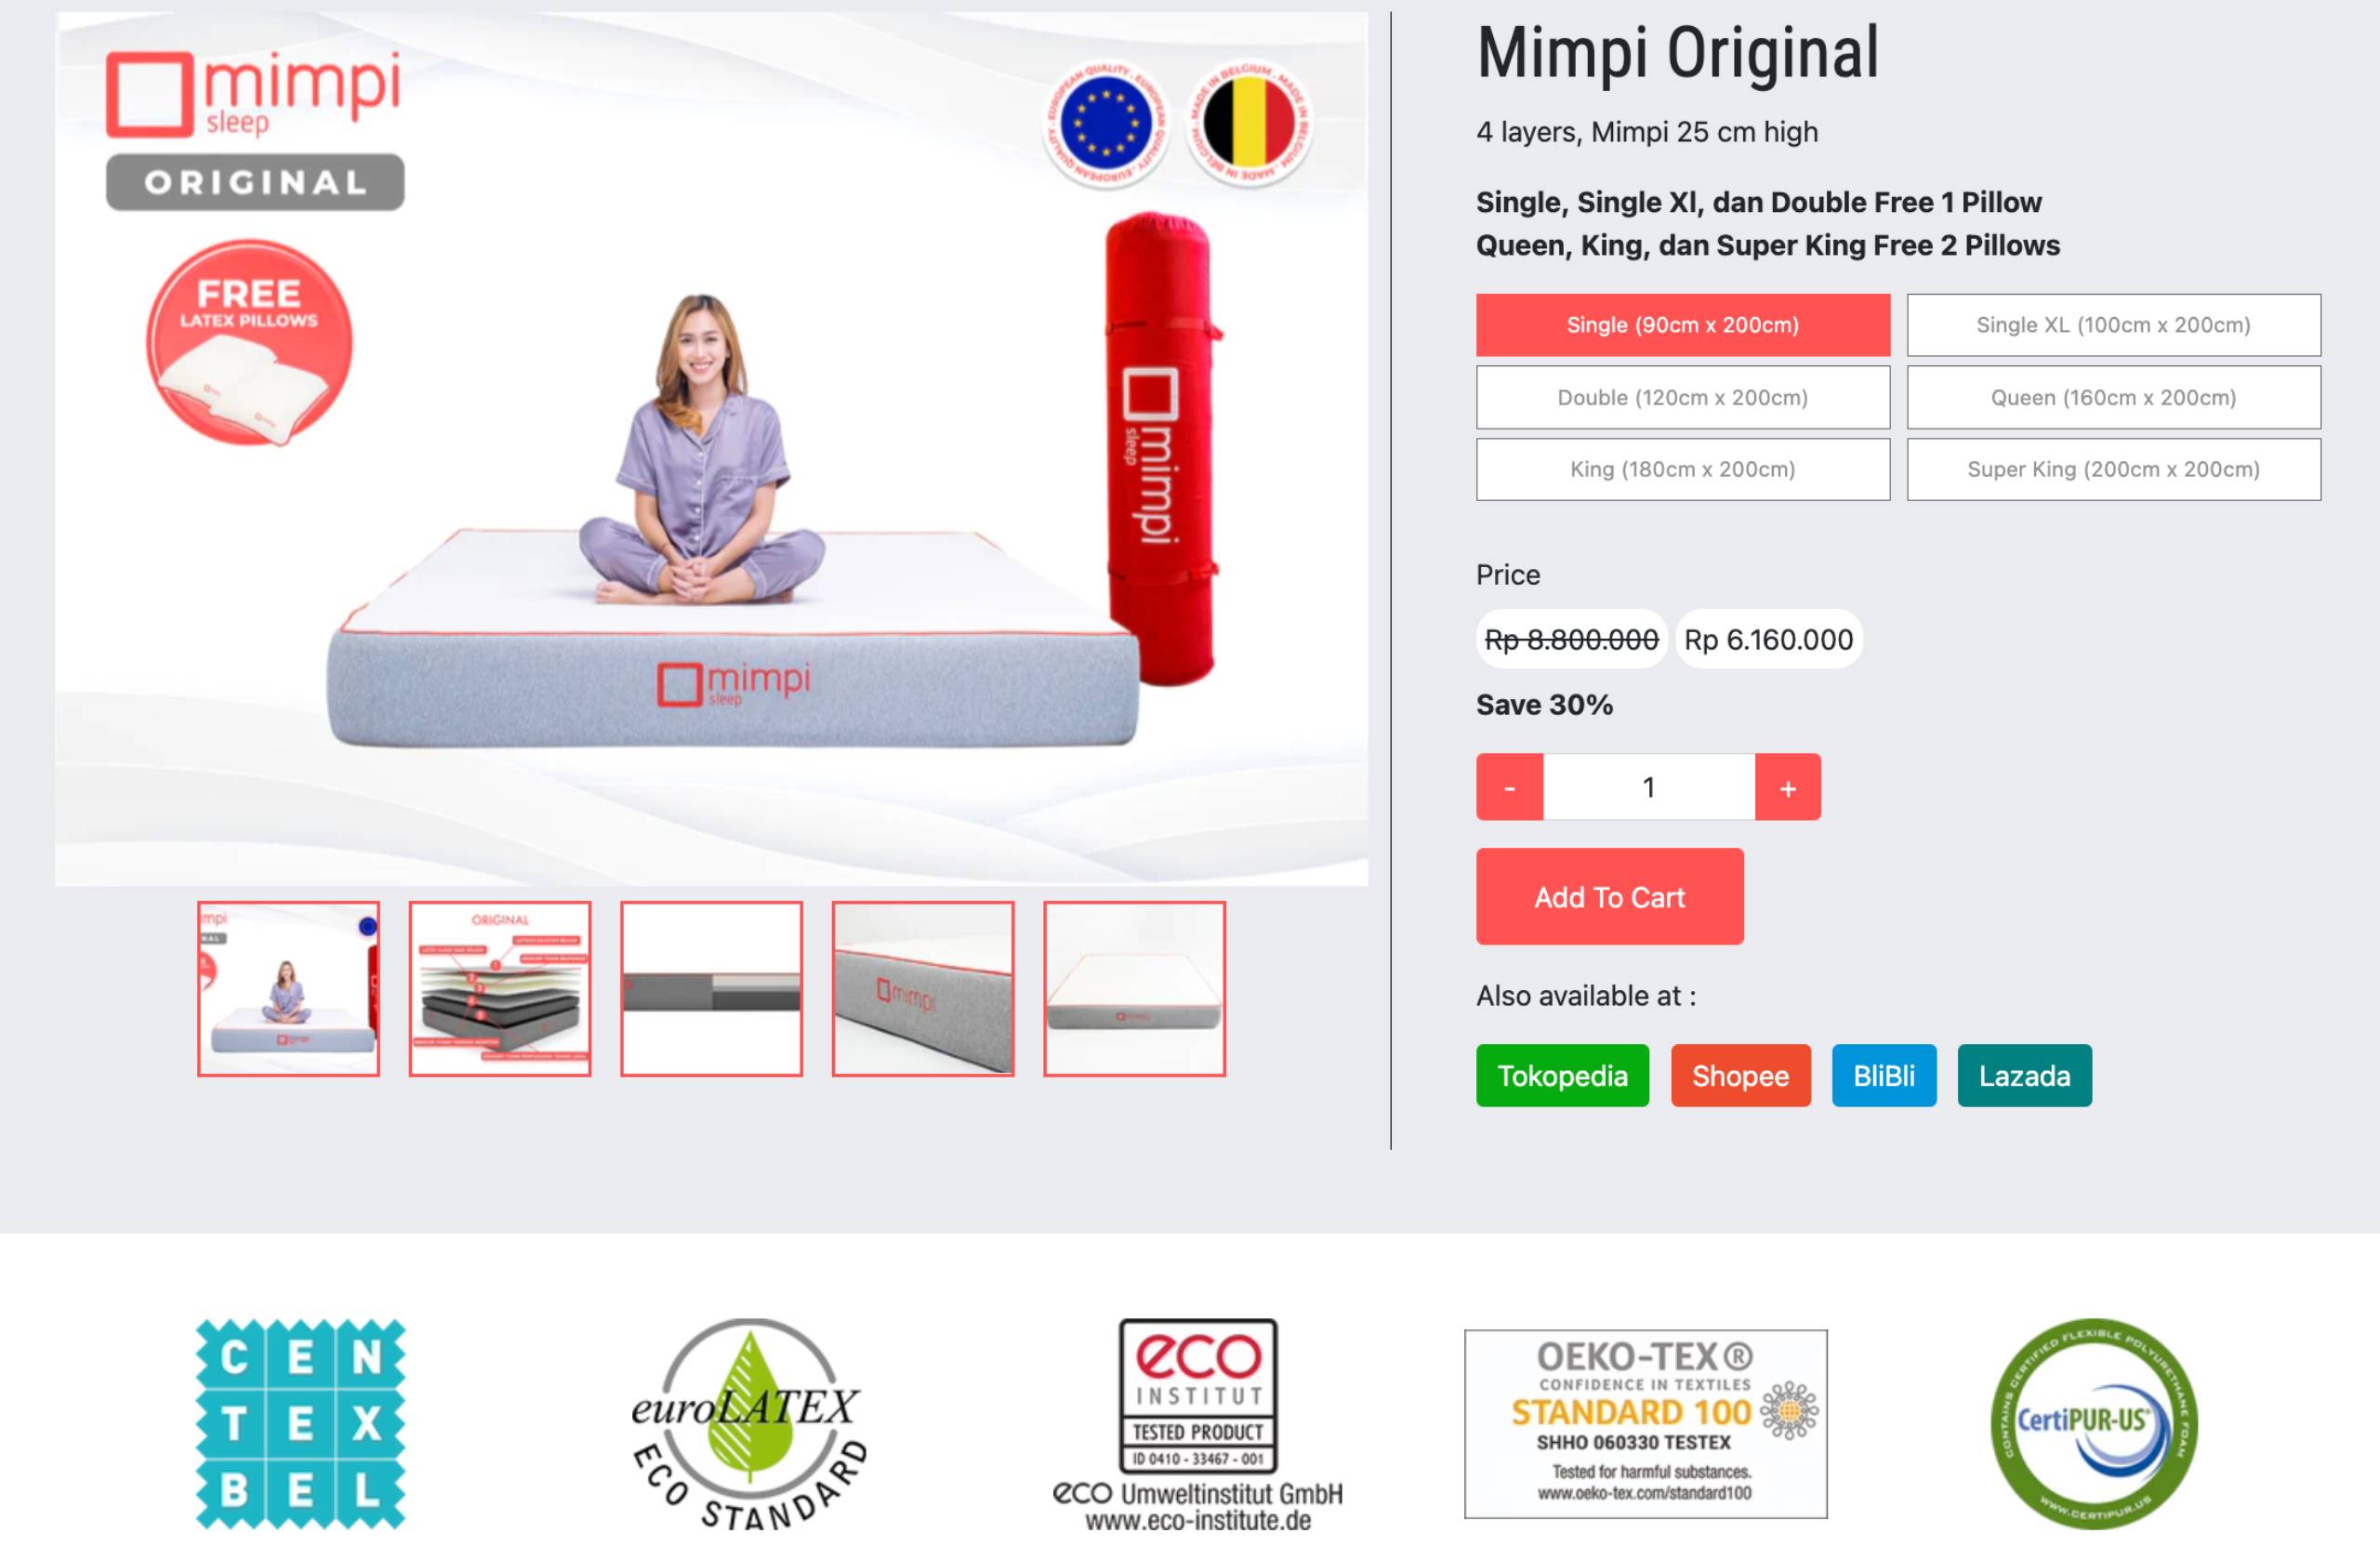 The Display of Mimpi Sleep website checkout page by SATUVISION